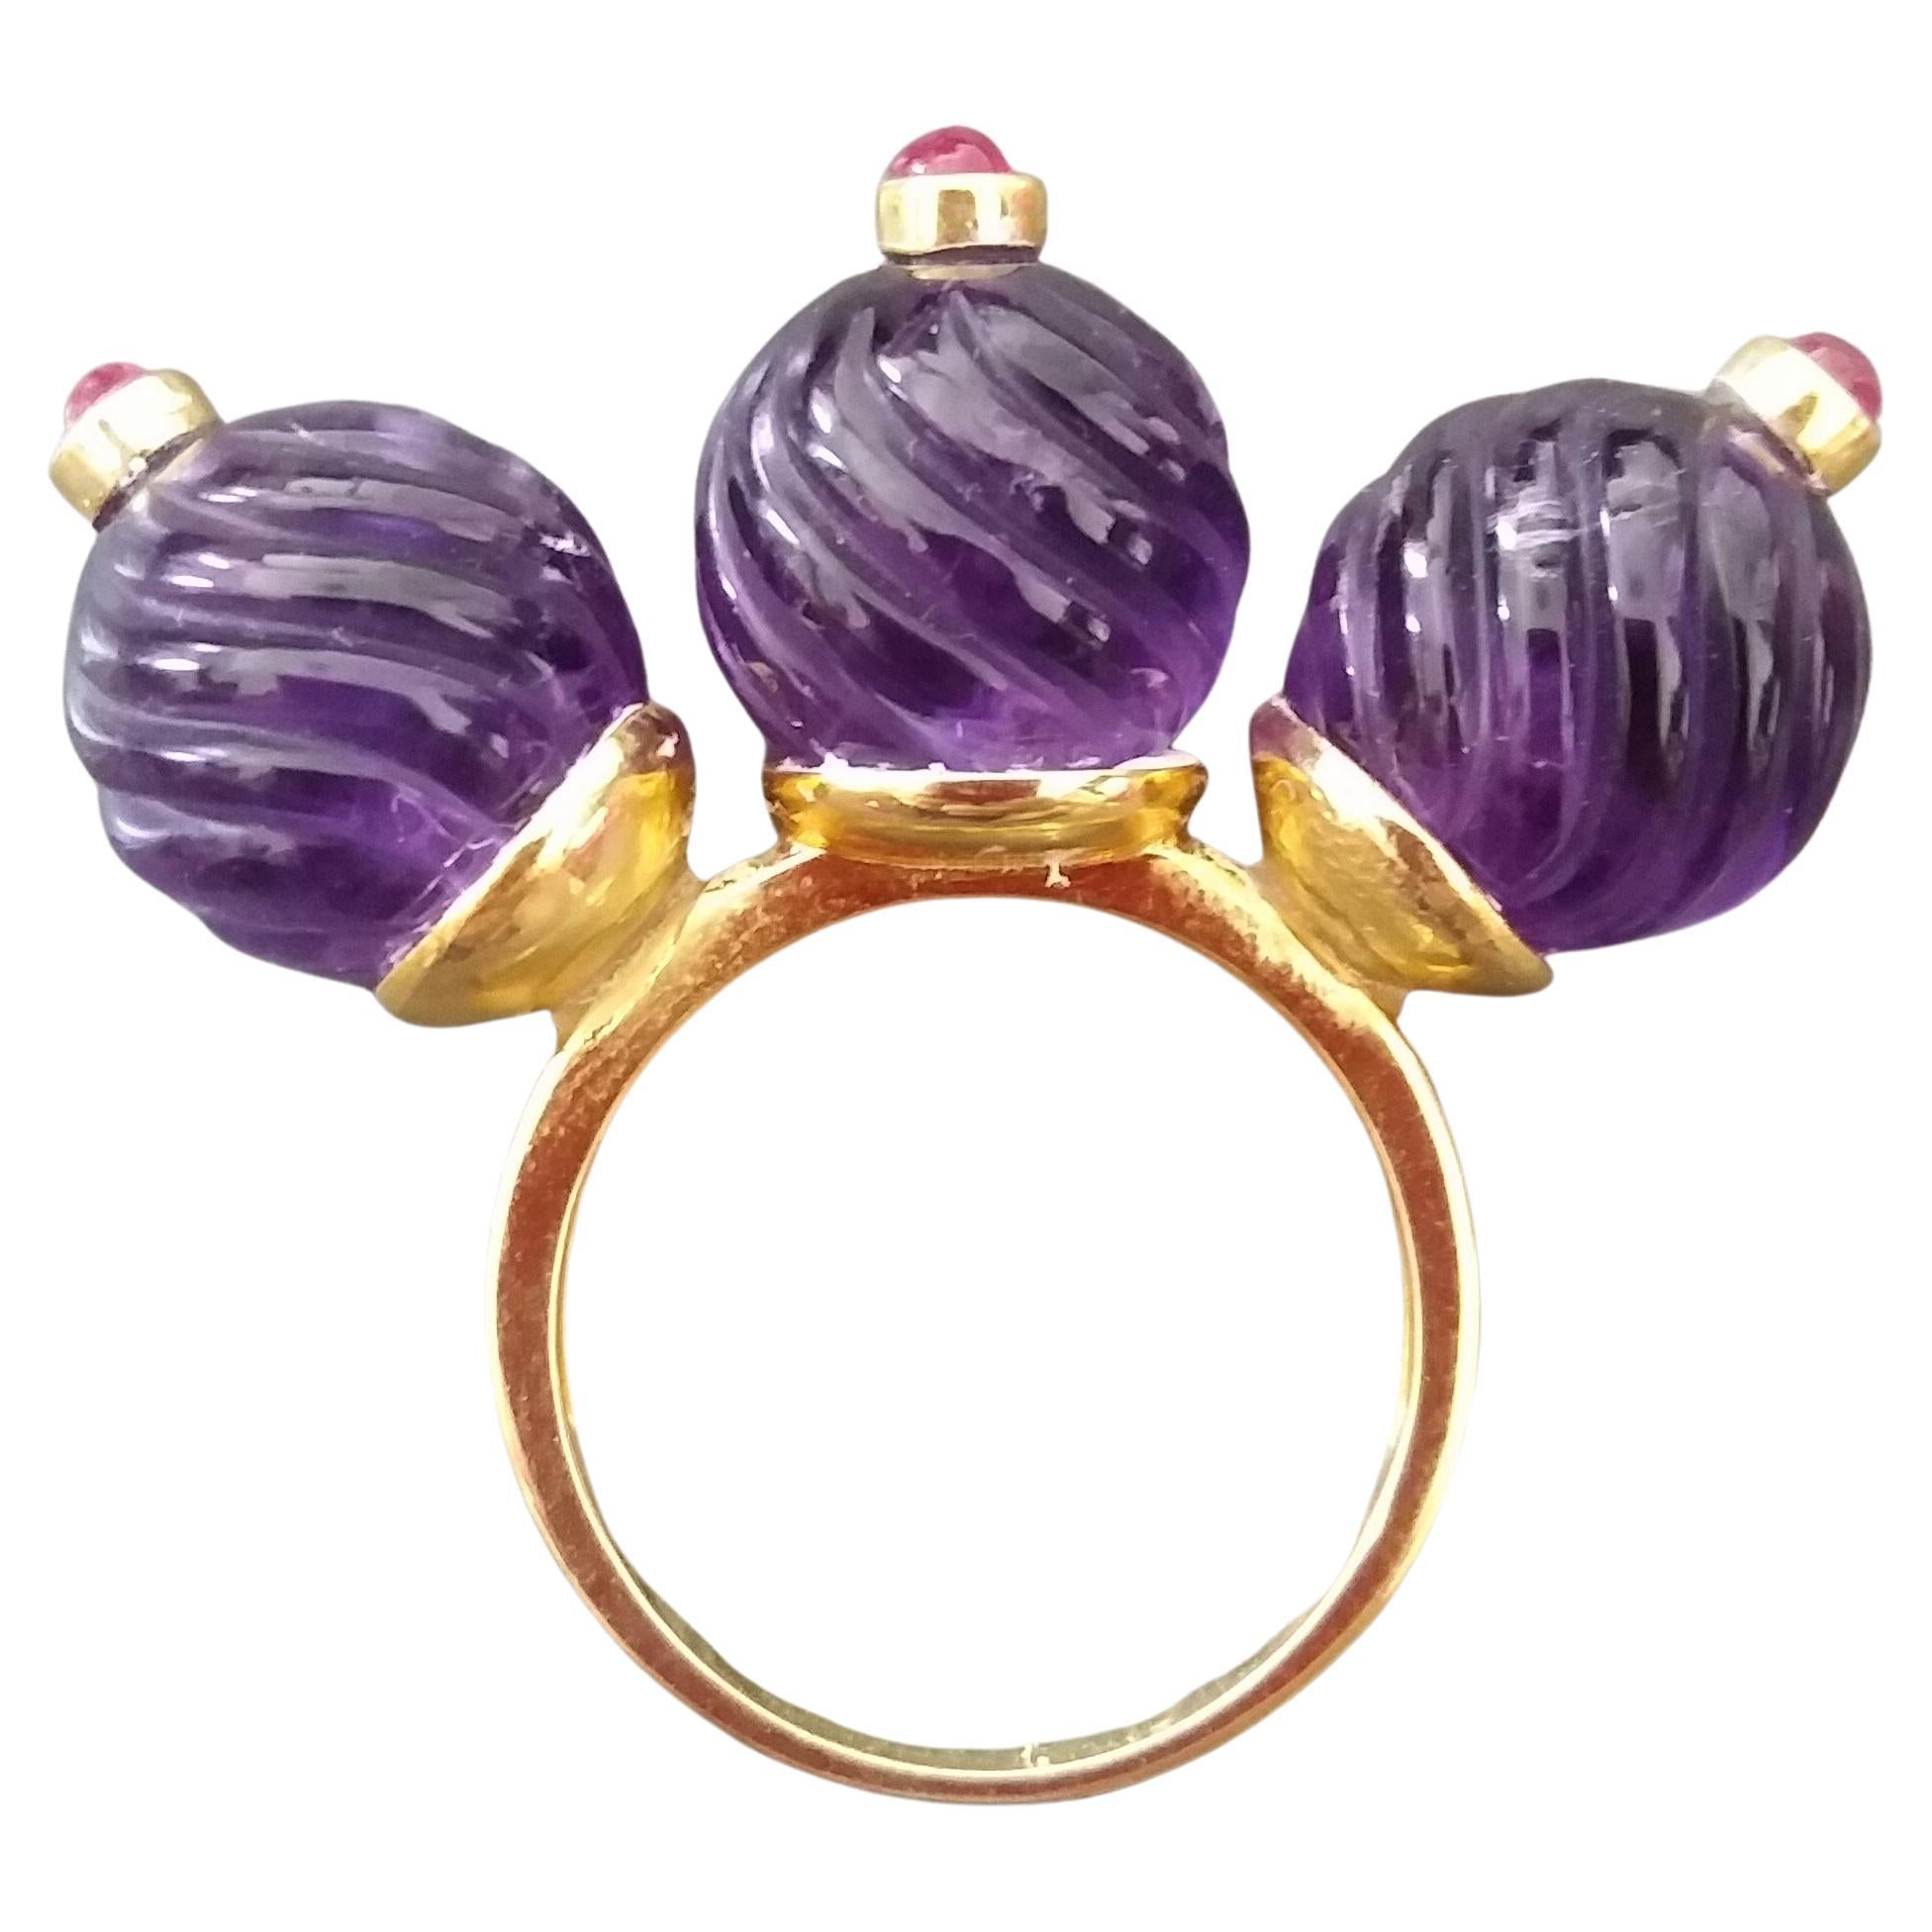 Three Round Carved Amethyst Beads Ruby Round Cabs 14K Yellow Gold Cocktail Ring